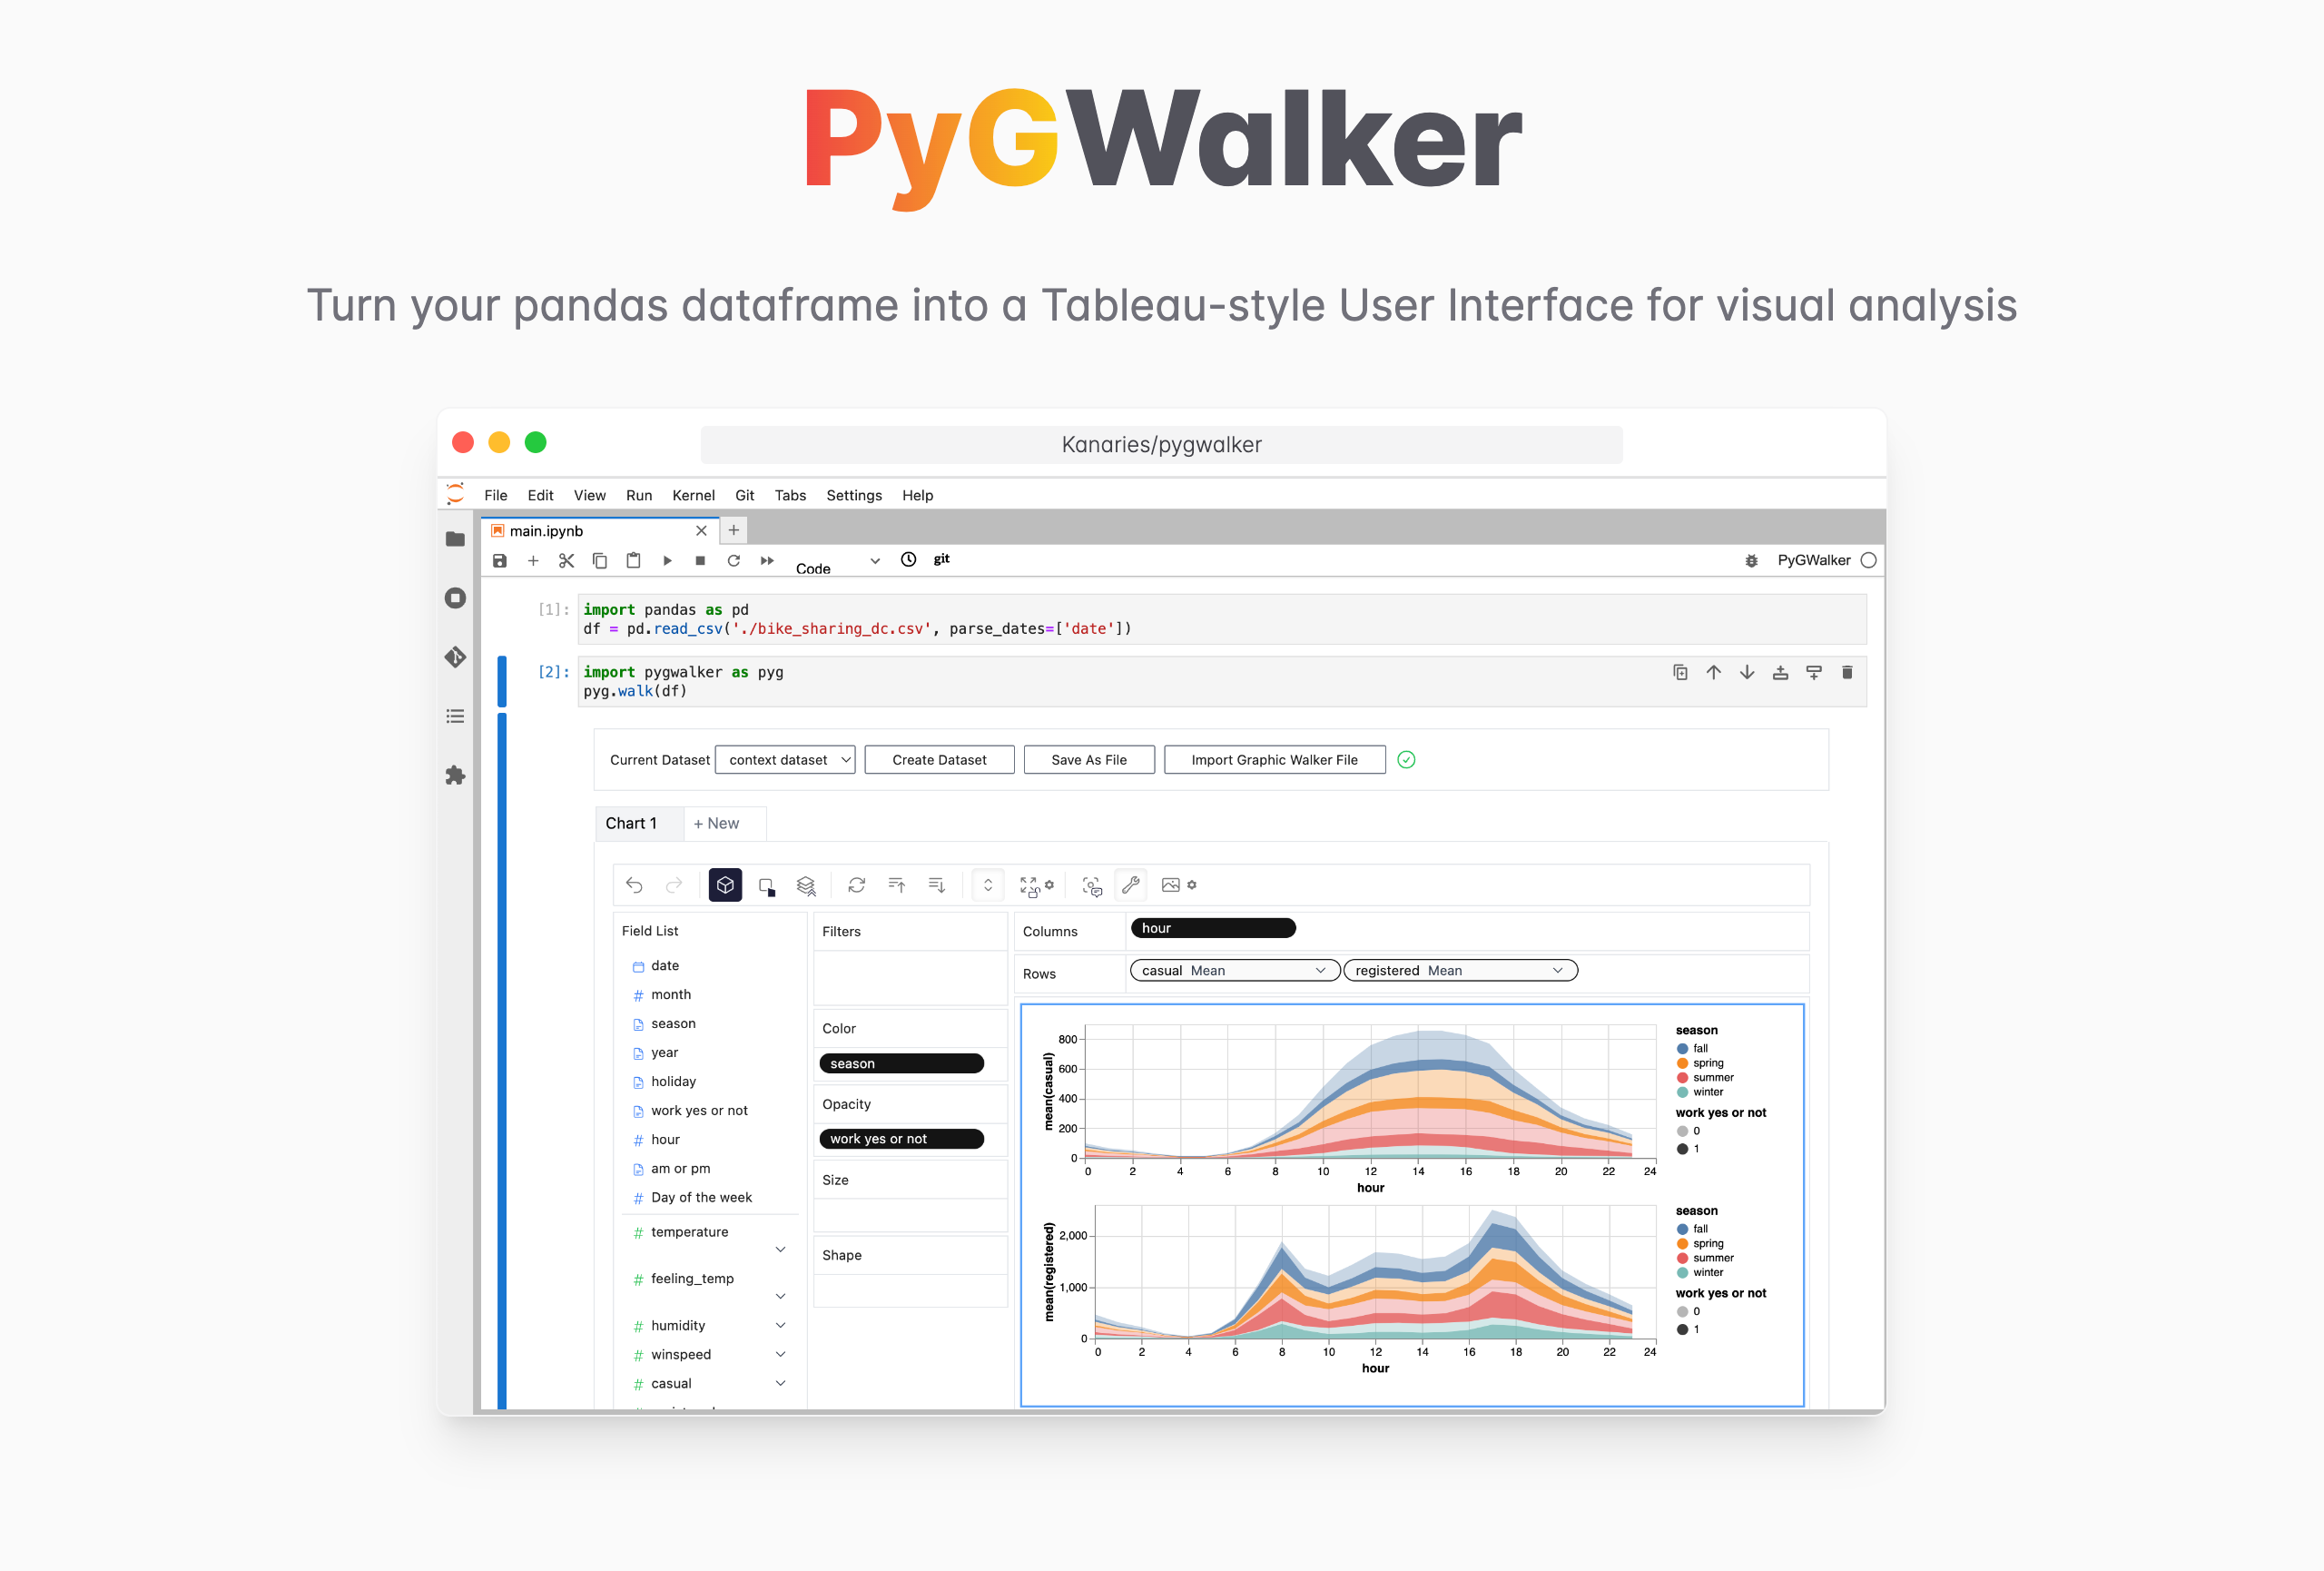 pygwalker: Combining Jupyter Notebook with a Tableau-like UI